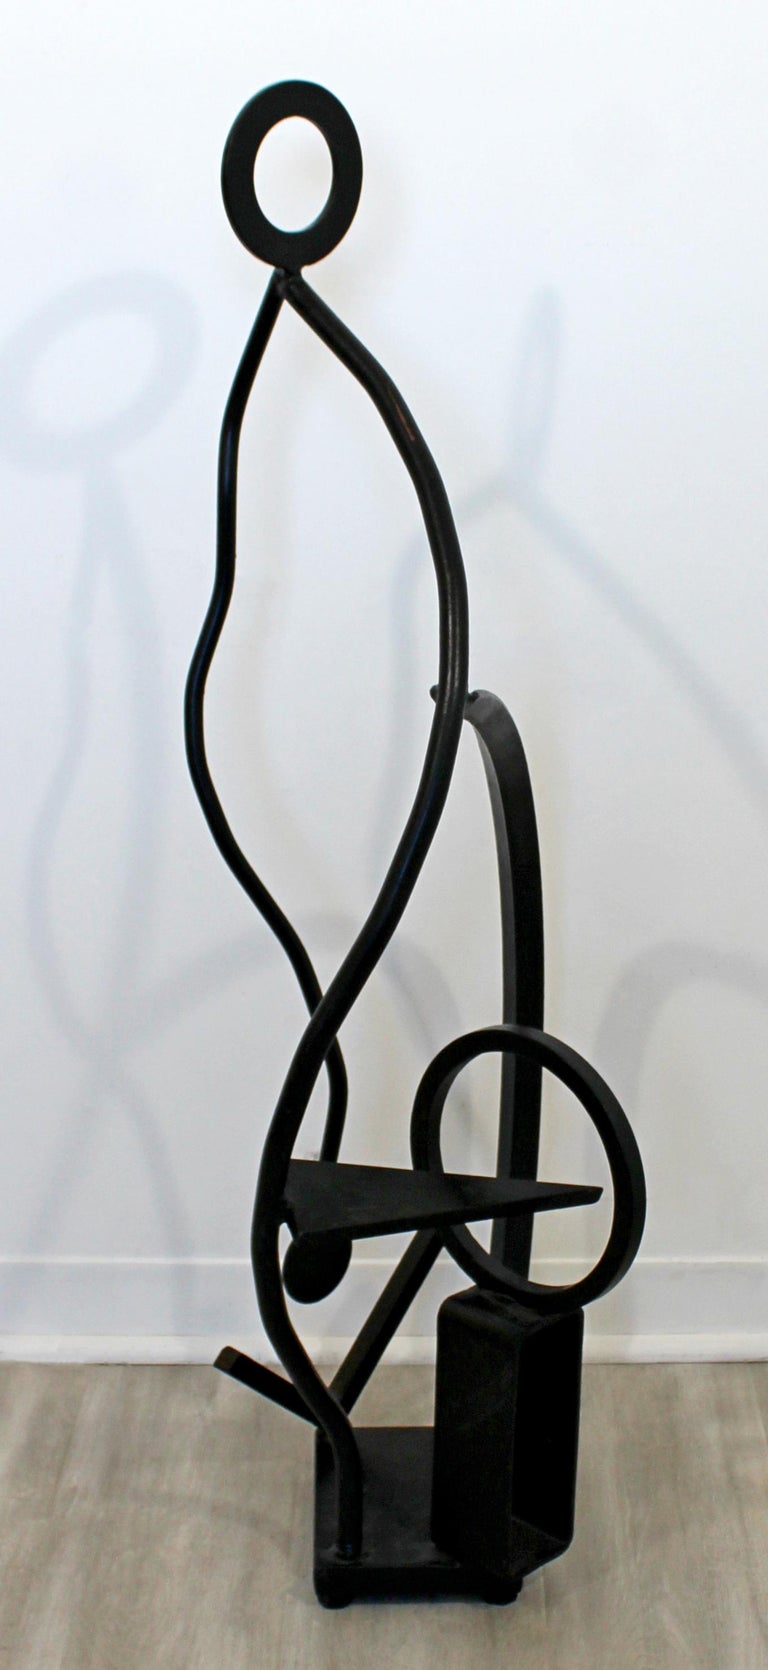 Contemporary Forged Iron Abstract Art Floor Sculpture Black by Robert Hansen For Sale 2